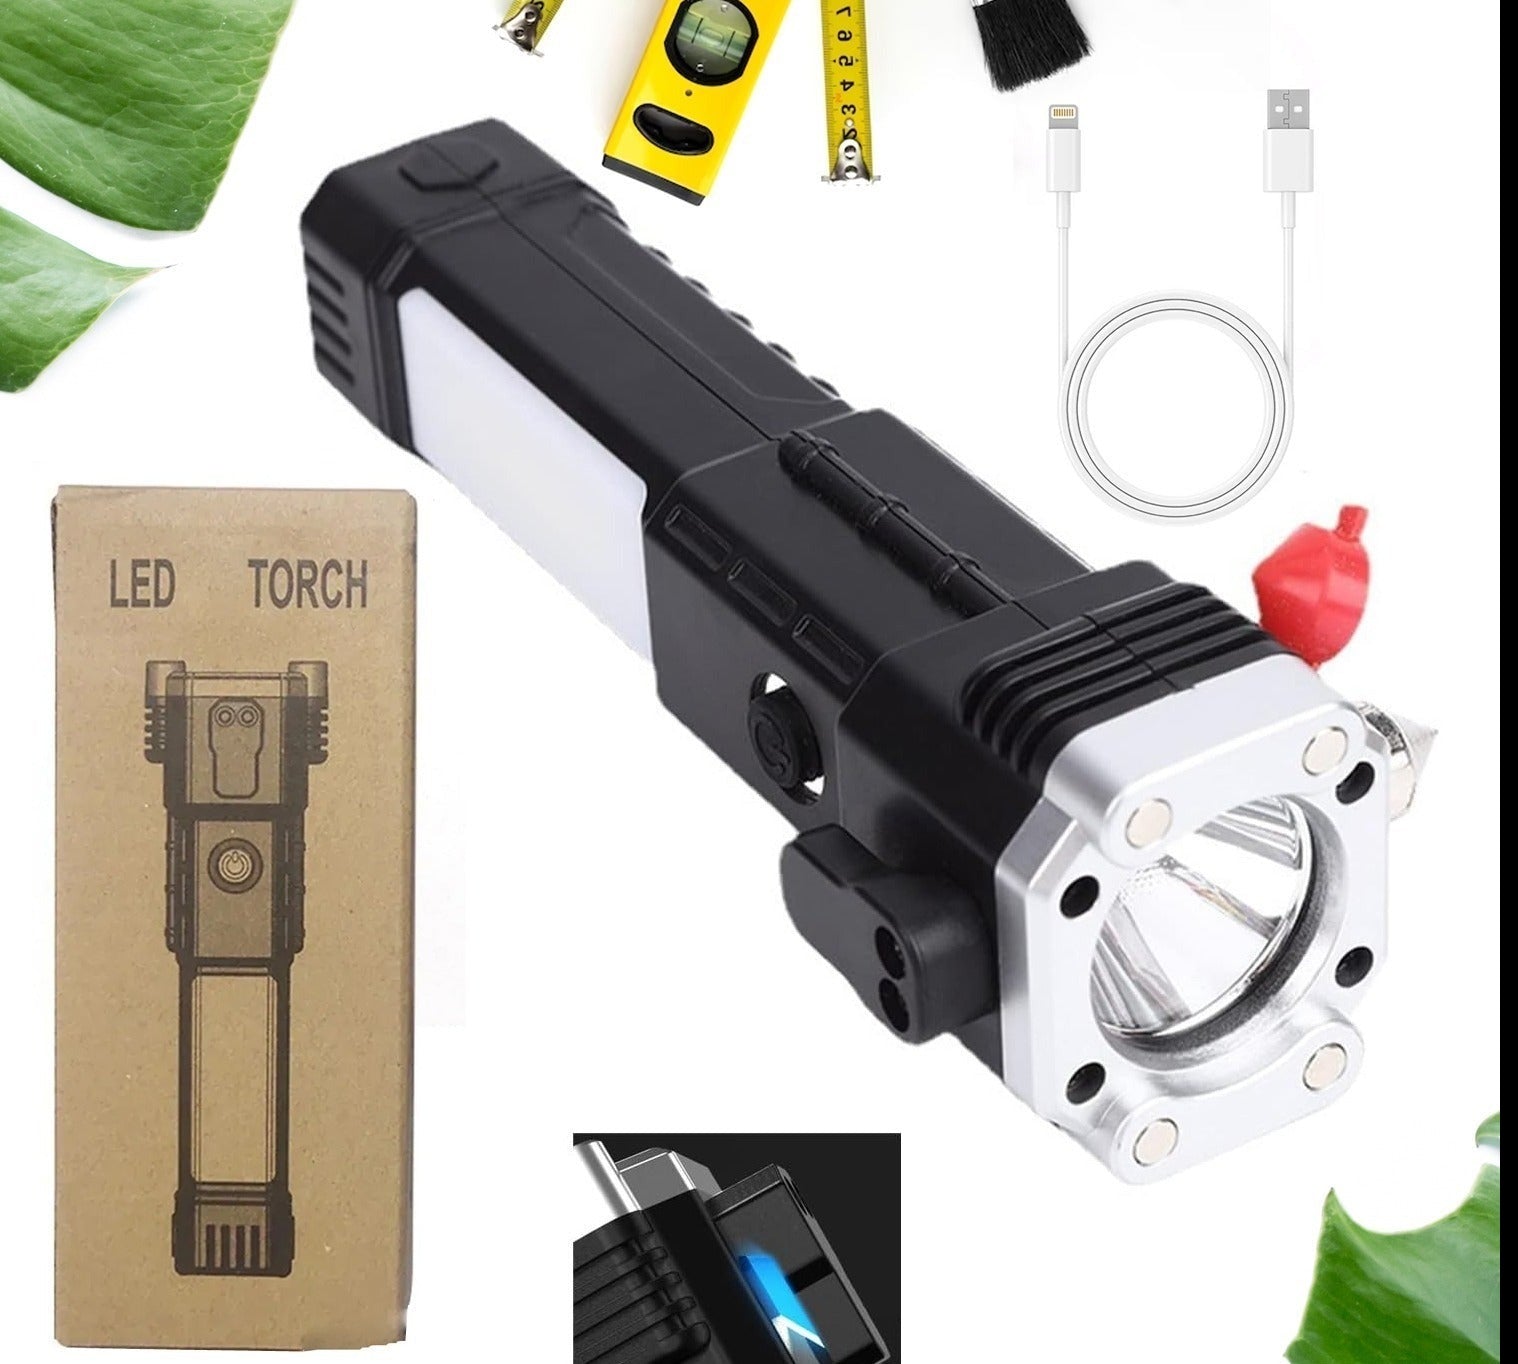 Versatile 3W Torch: Rechargeable, LED, and Multi-Tool for Car, Camping, and More!